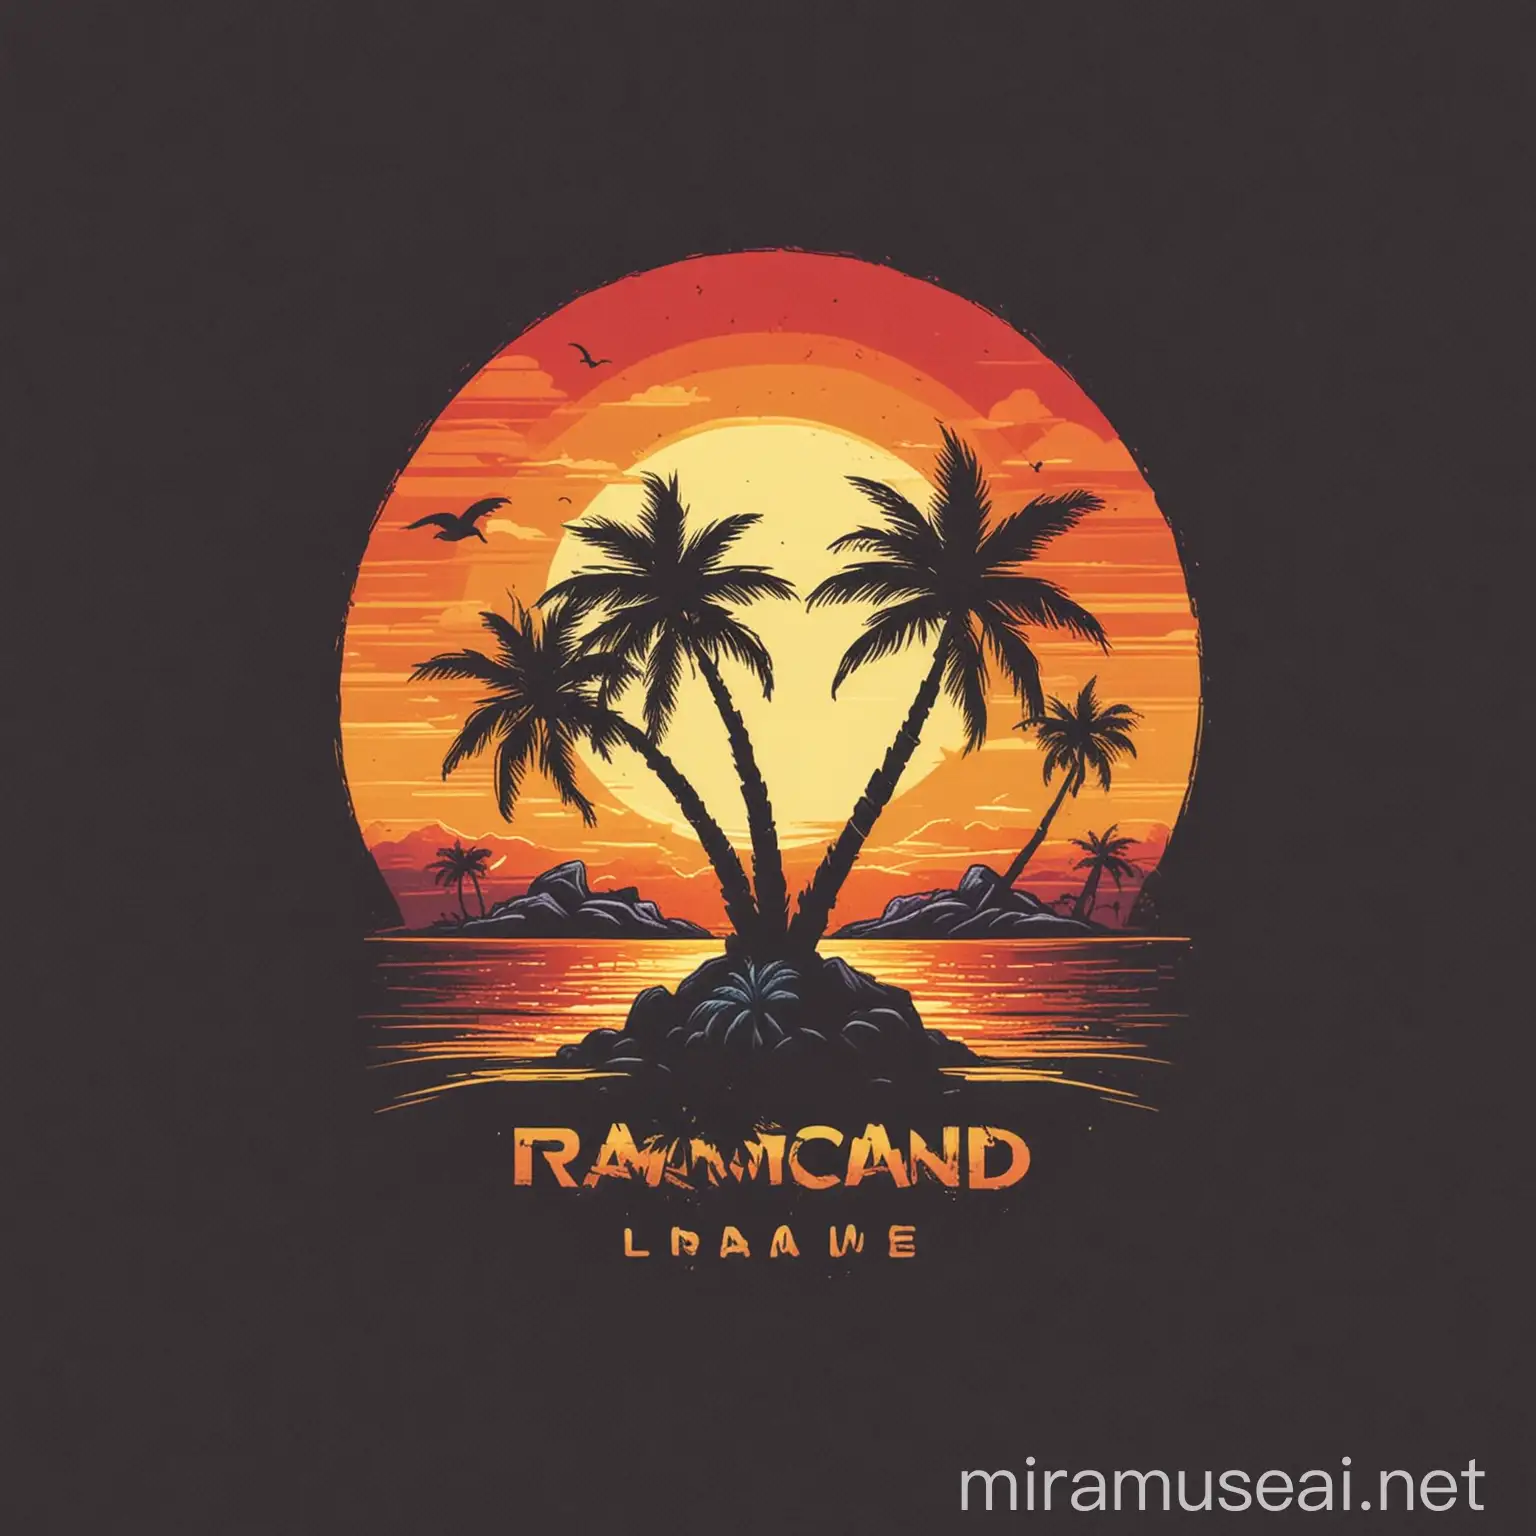 Tropical Island Logo with Black Palm Trees at Sunset for TShirt Print